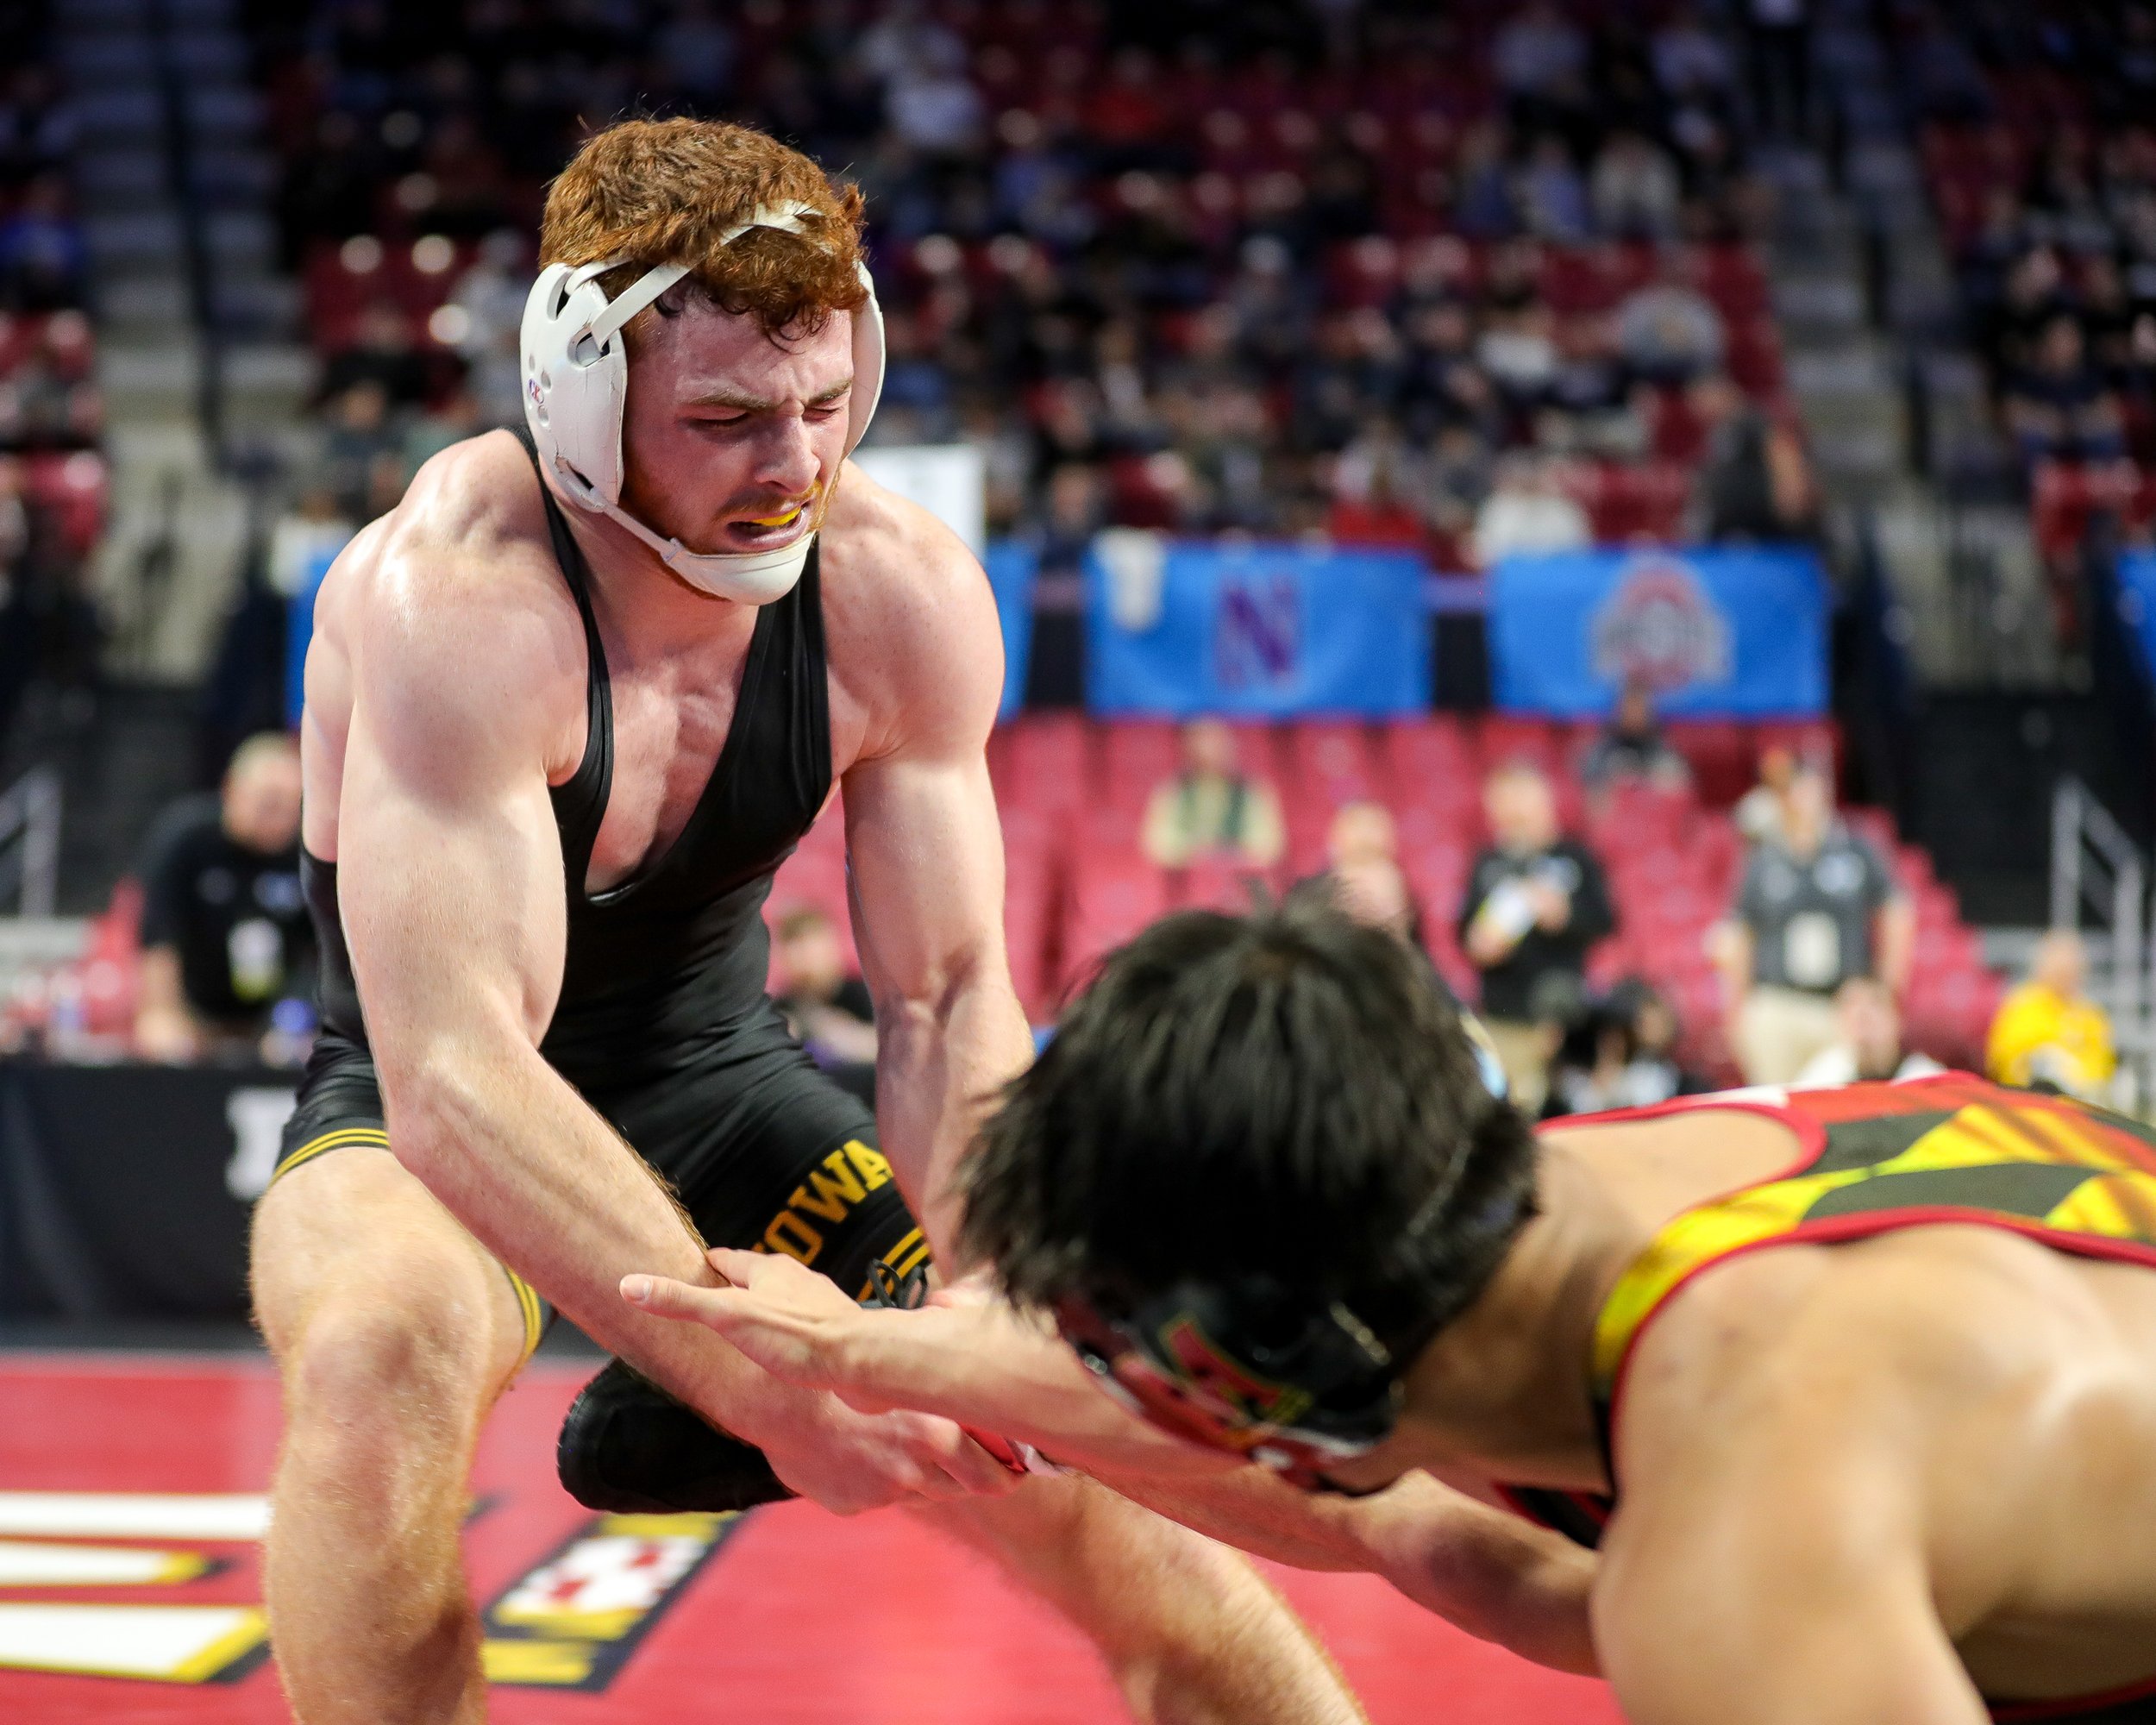  Iowa wrestler Michael Caliendo grapples with Maryland’s AJ Rodriguesin a 165-lb preliminary match during the Big Ten Wrestling Championships at the Xfinity Center in College Park, Maryland on Saturday, March 9, 2023. Caliendo won via fall at 5:30. (